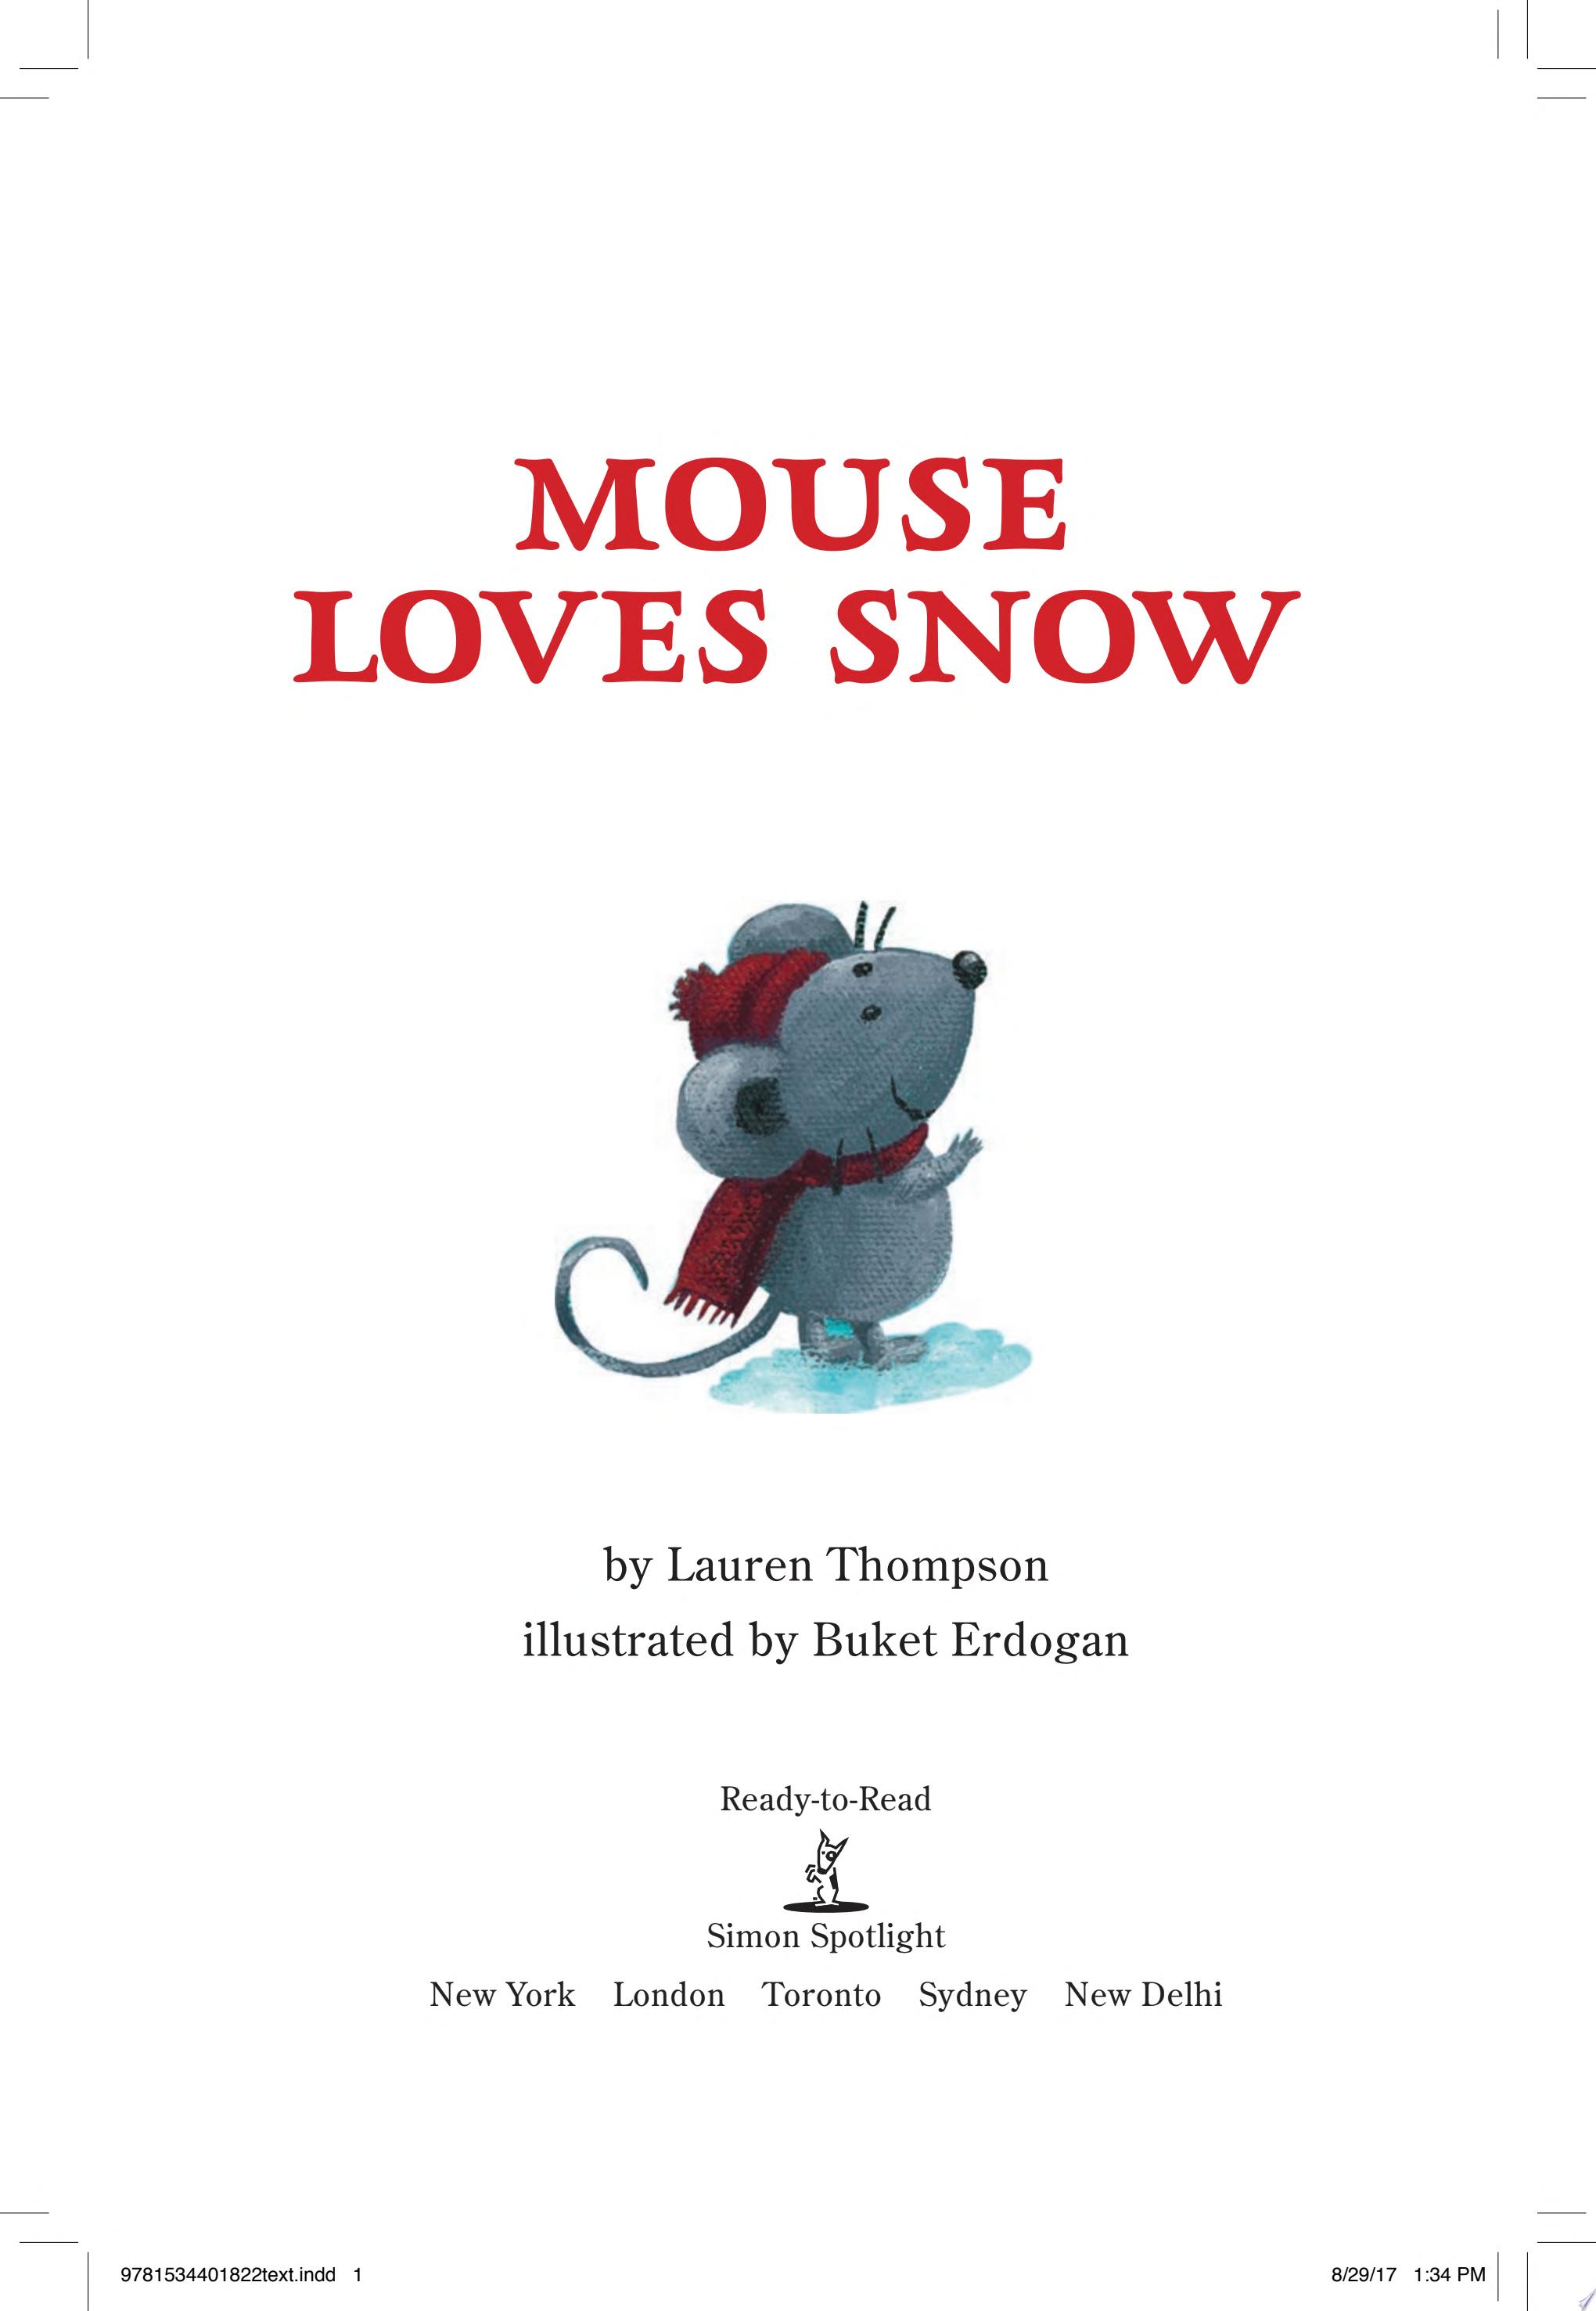 Image for "Mouse Loves Snow"